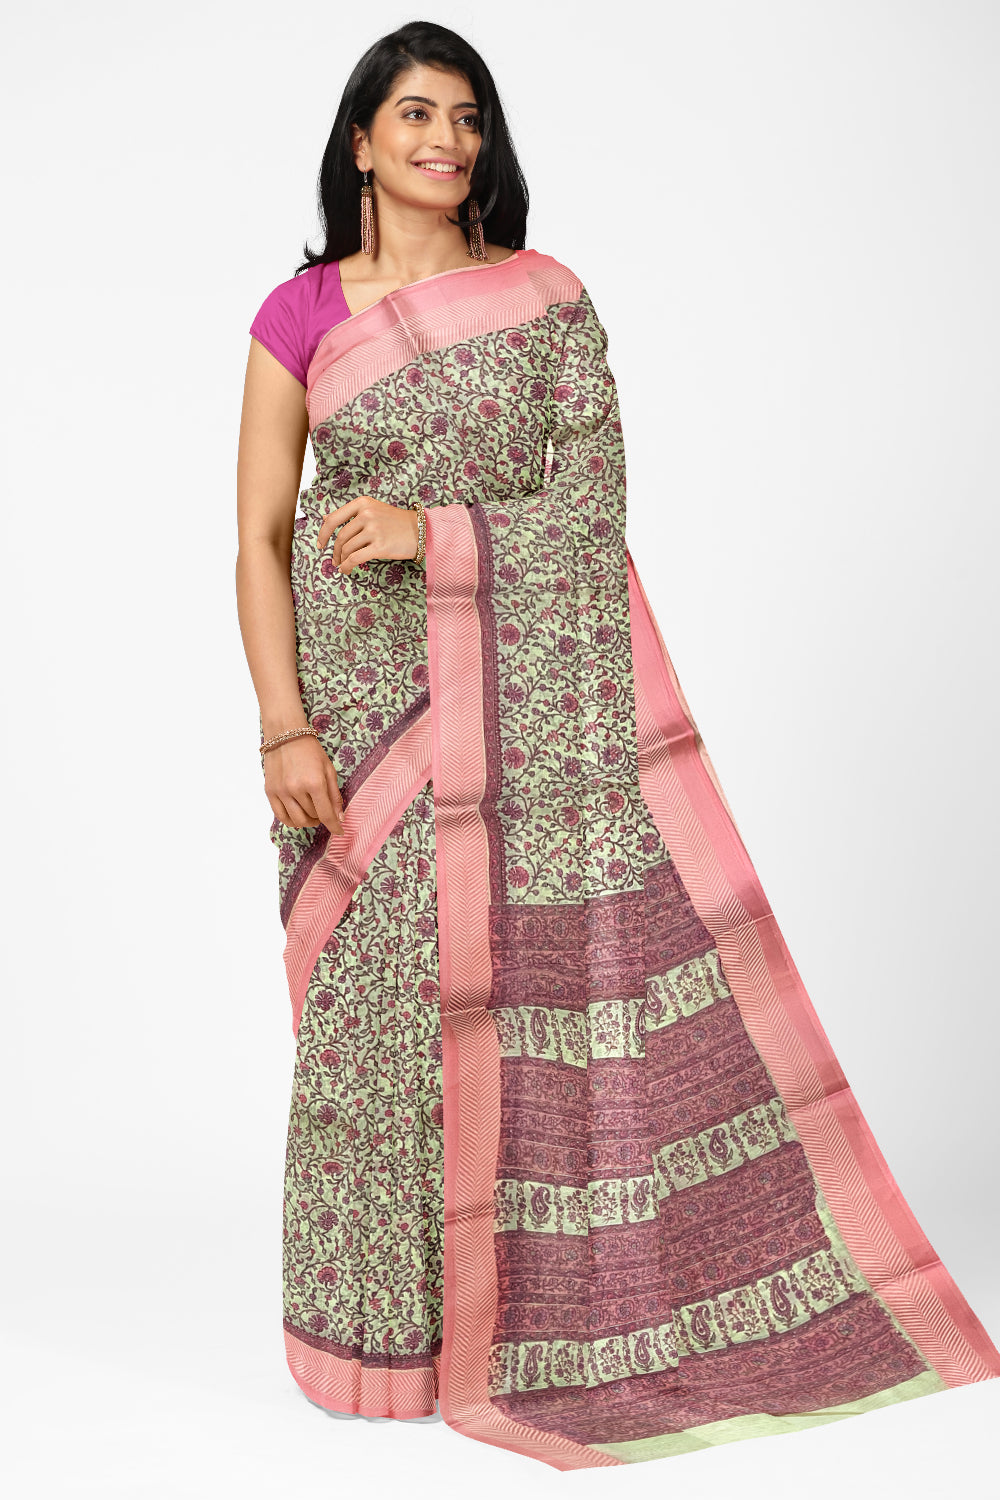 Southloom Cotton Floral Printed Saree with Pink Border